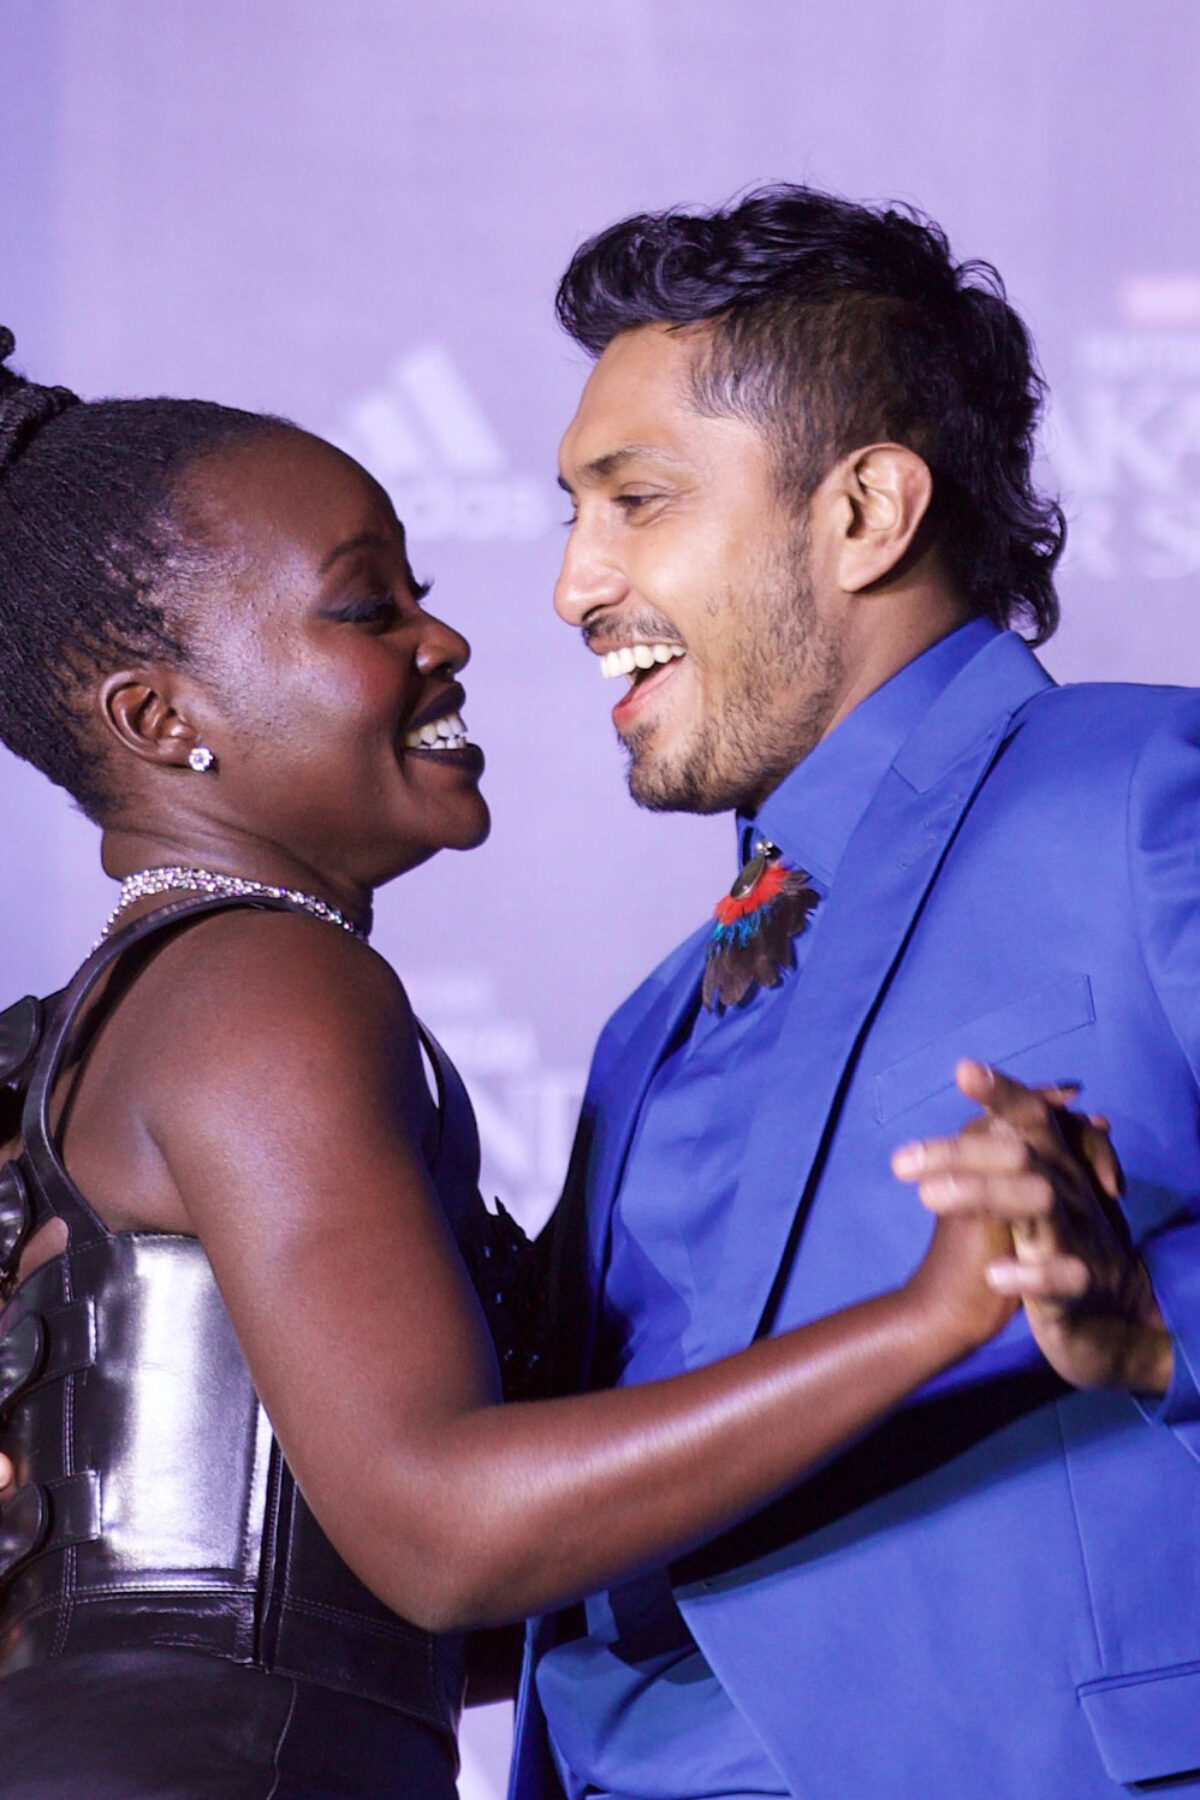 STATE OF MEXICO, MEXICO . NOVEMBER 9: Lupita Nyongo and Tenoch Huerta dance during the Black Panther: Wakanda Forever Fan Event at Plaza Satelite. On November 9, 2022 in State of Mexico, Mexico. (Photo credit should read Julian Lopez/ Eyepix Group/Future Publishing via Getty Images)